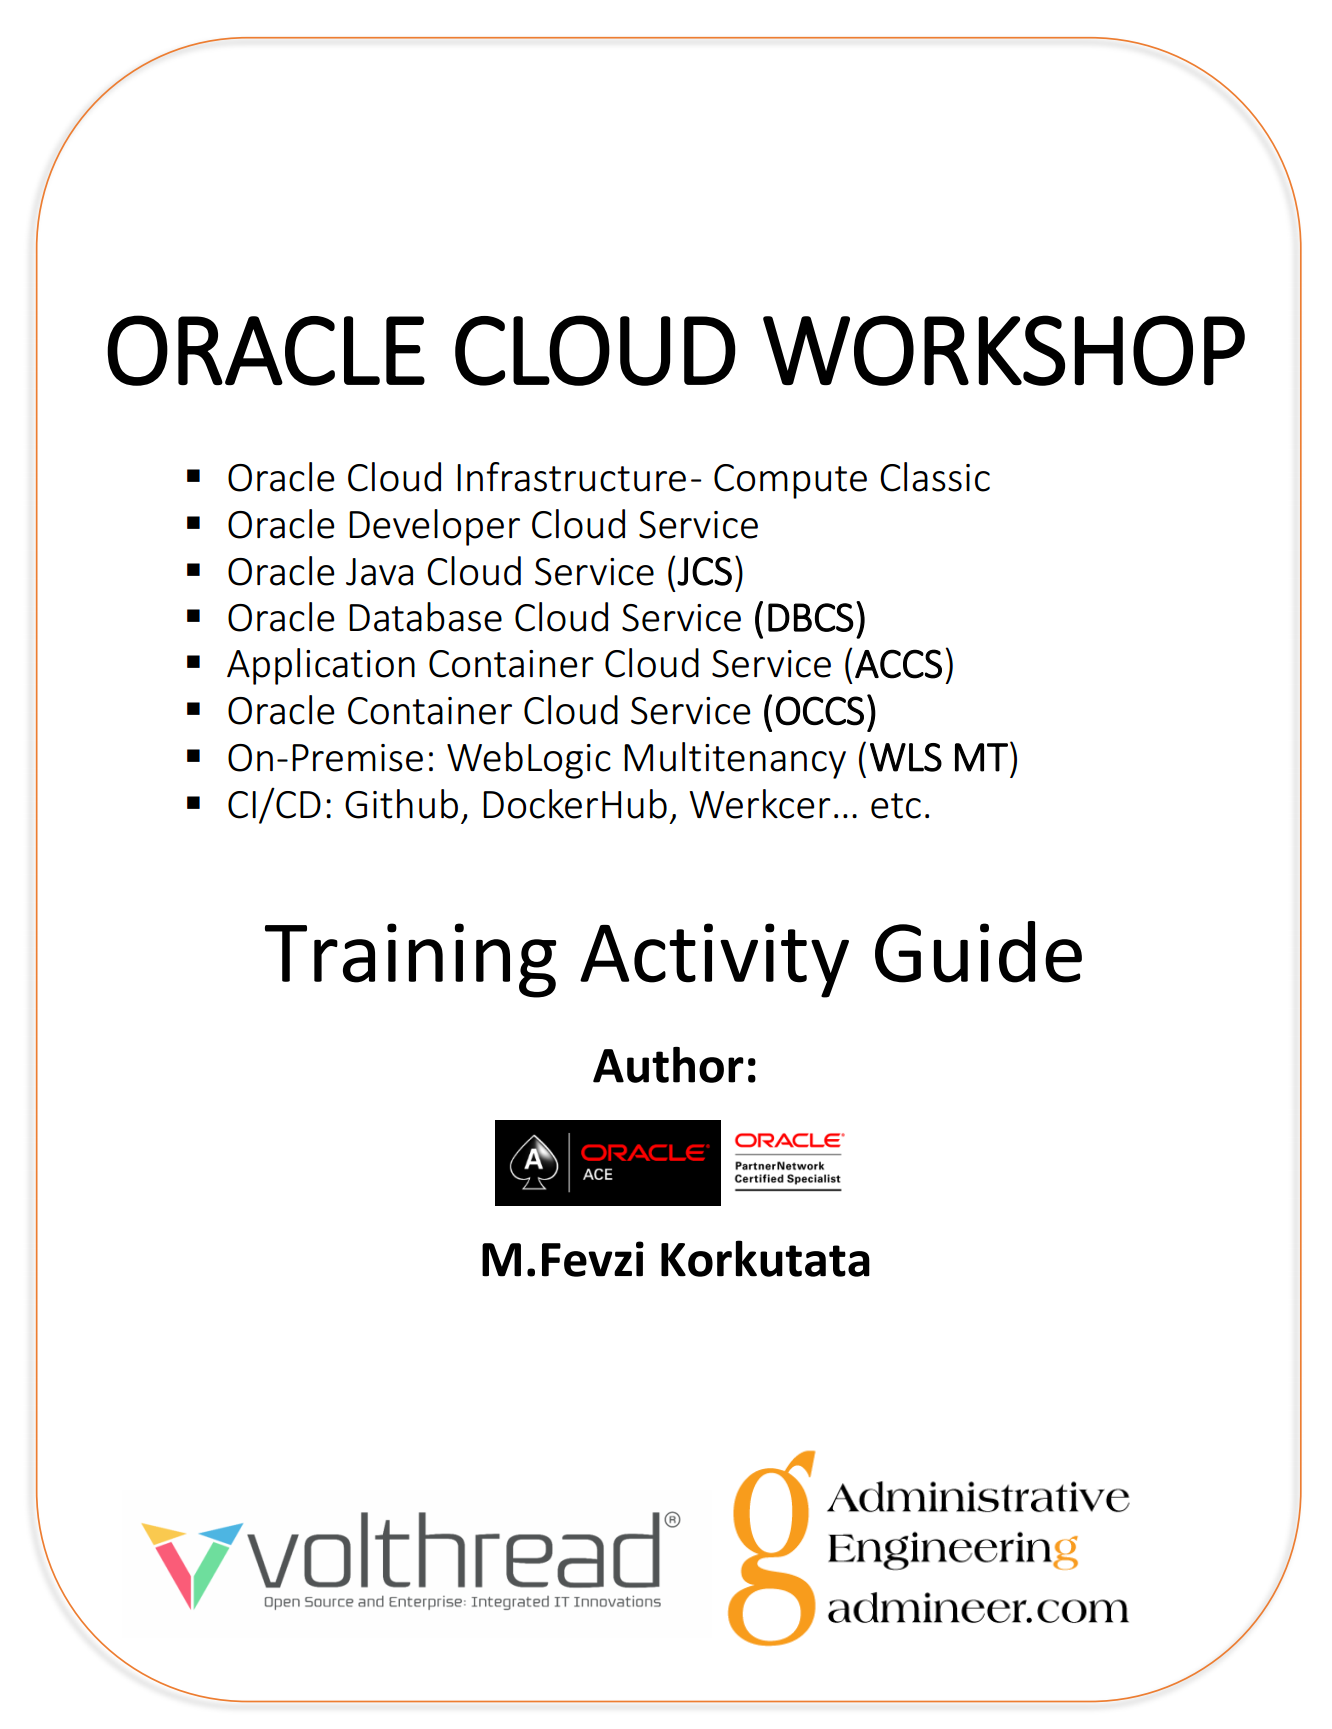 Training Activity Guide Cover Page by M.Fevzi Korkutata